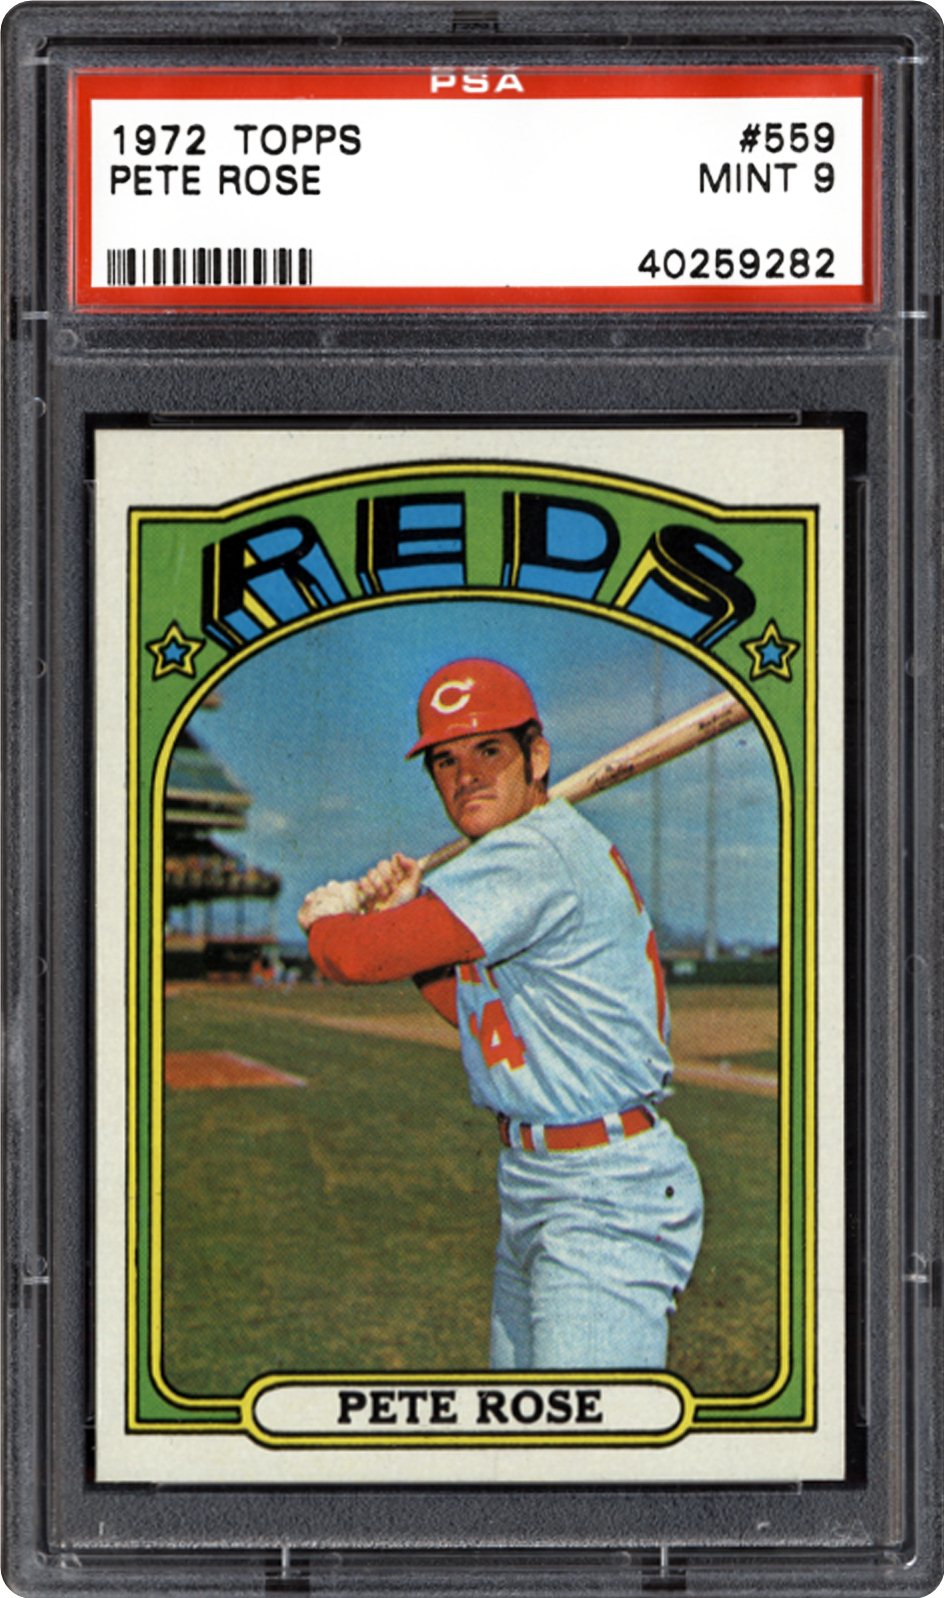 1972 Topps Pete Rose PSA CardFacts™